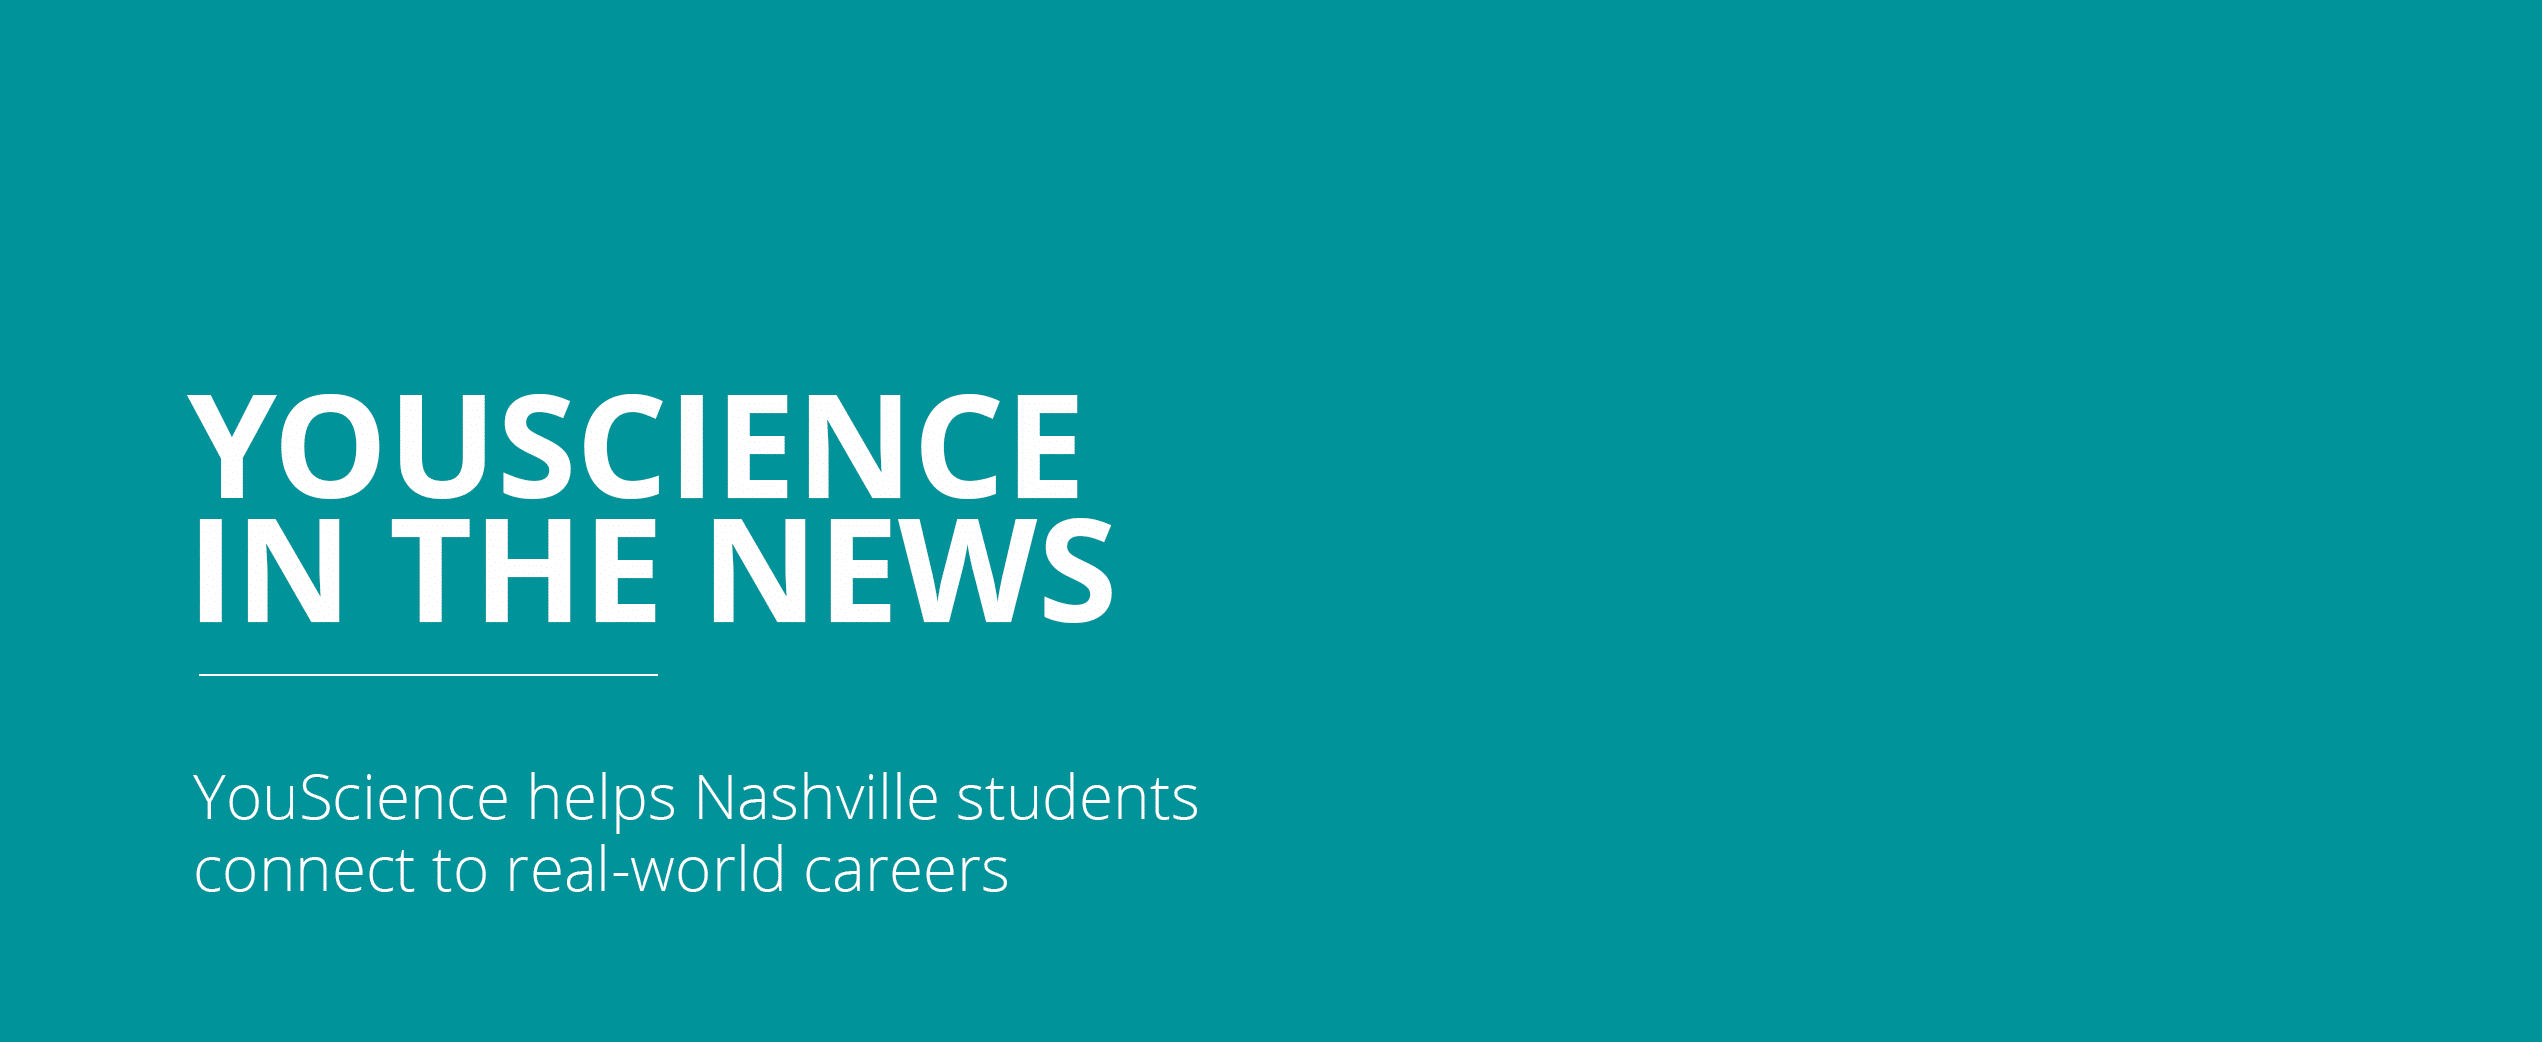 YouScience helps Nashville students connect to real-world careers